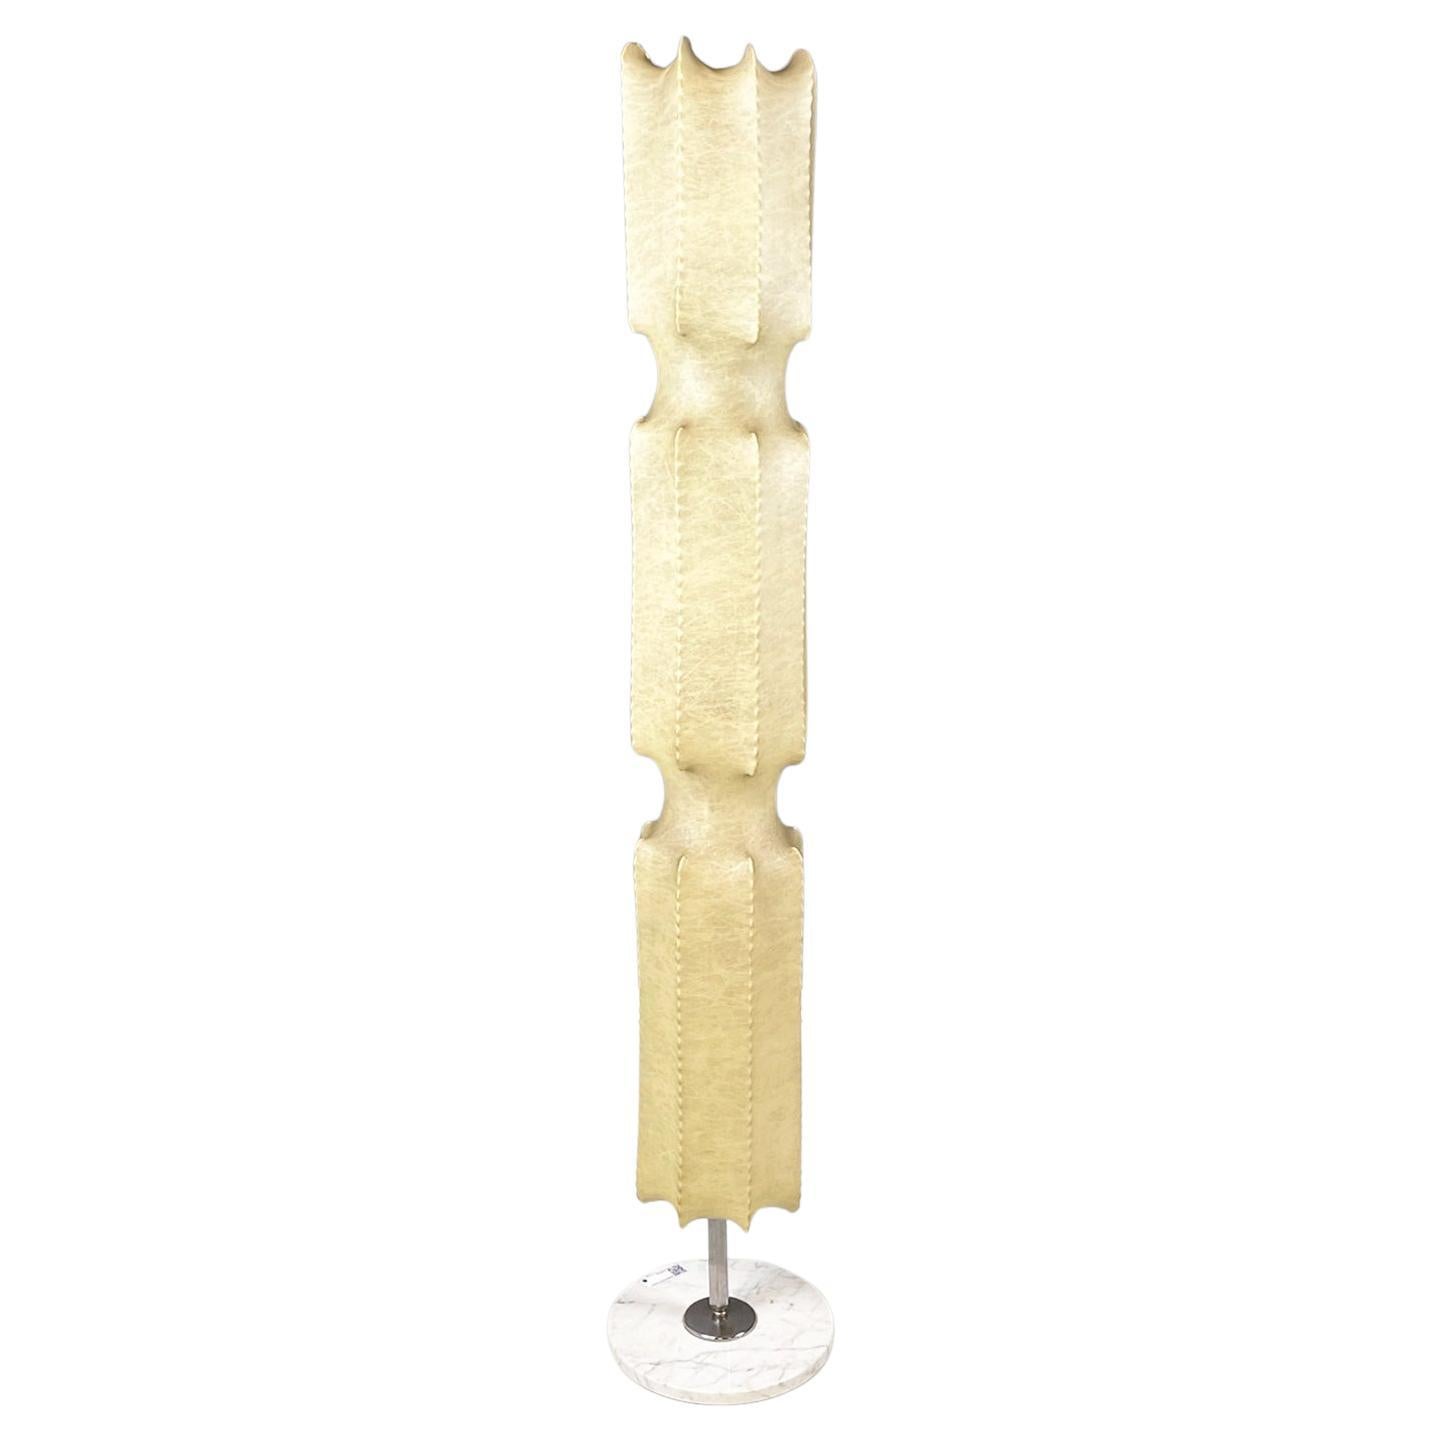 Italian Mid-Century Modern Floor Lamp in Cocoon, White Marble and Metal, 1960s For Sale